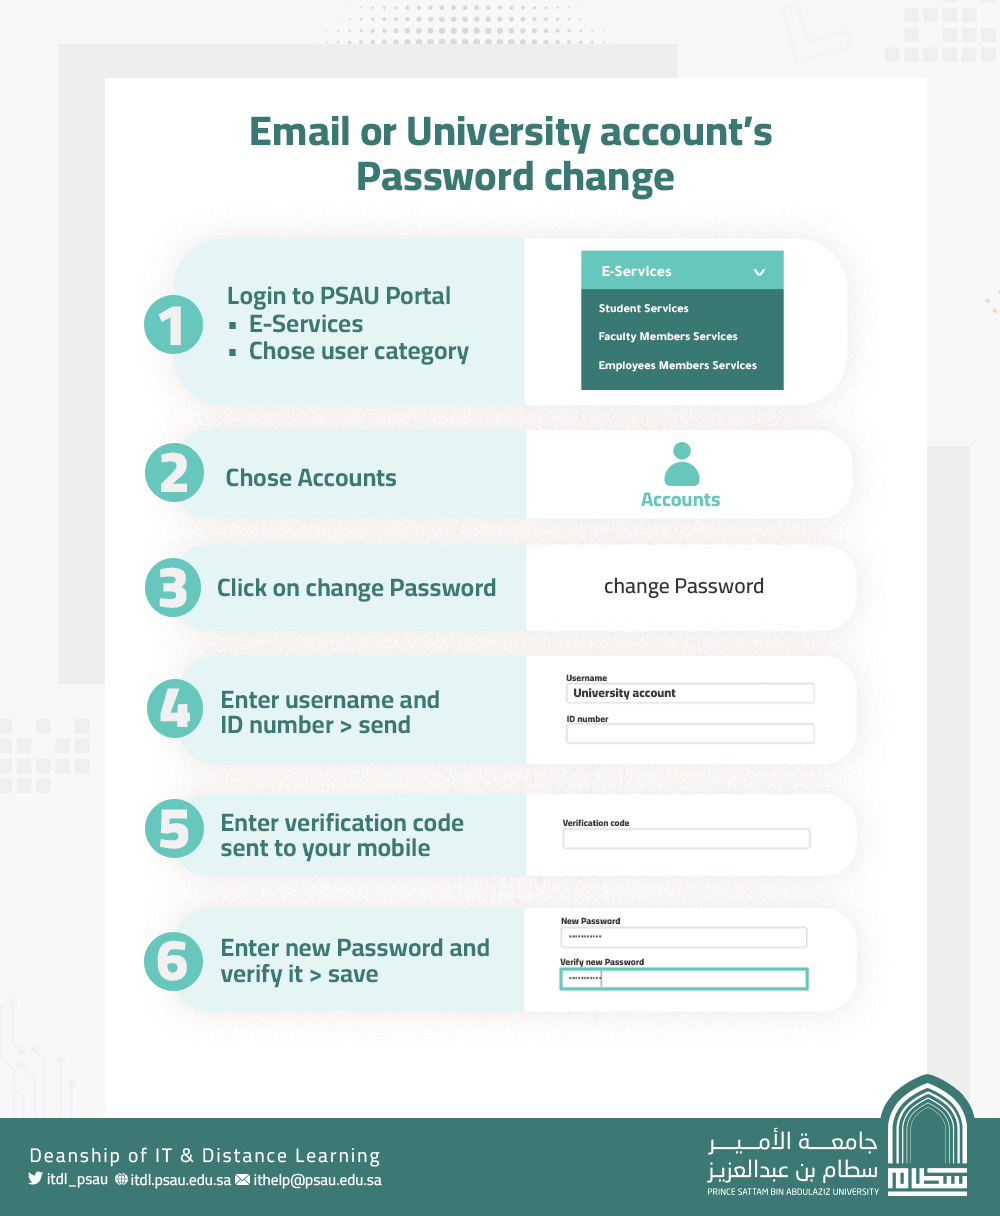 Changing the password for the university account or e-mail